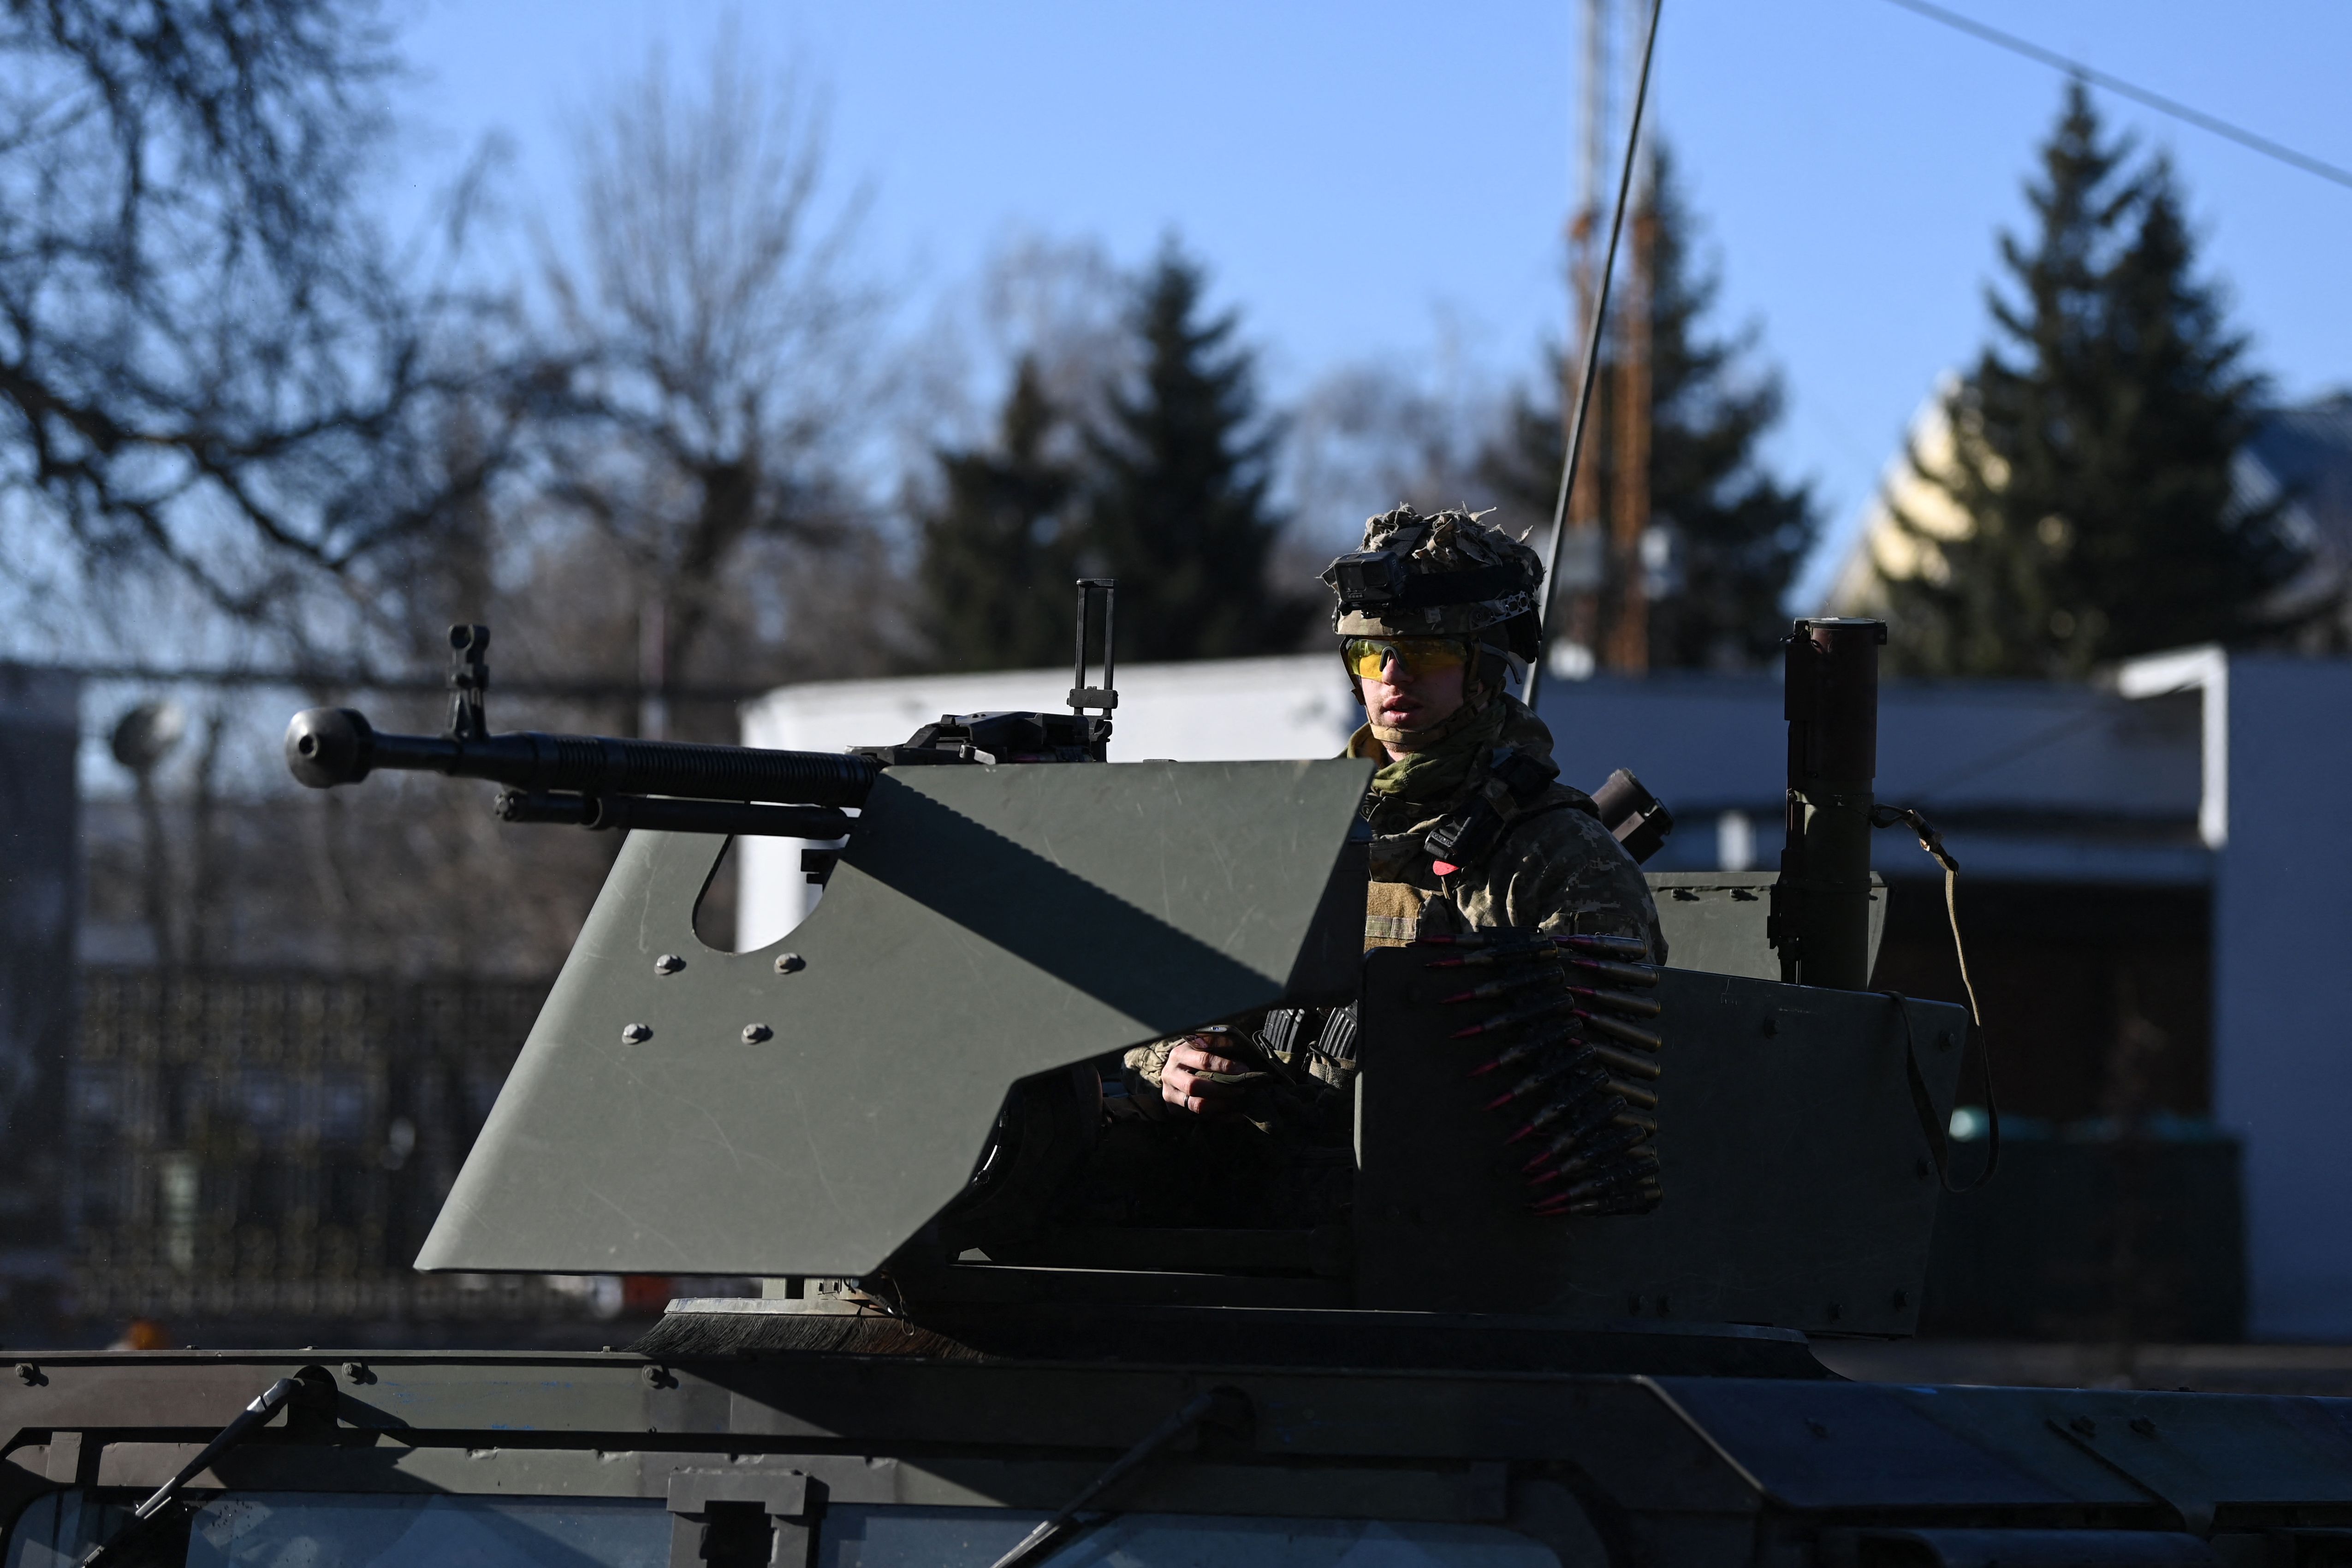 A Ukrainian soldier in an armored vehicle in Kyiv on Feb. 26. Photo: Daniel Leal/AFP via Getty Images